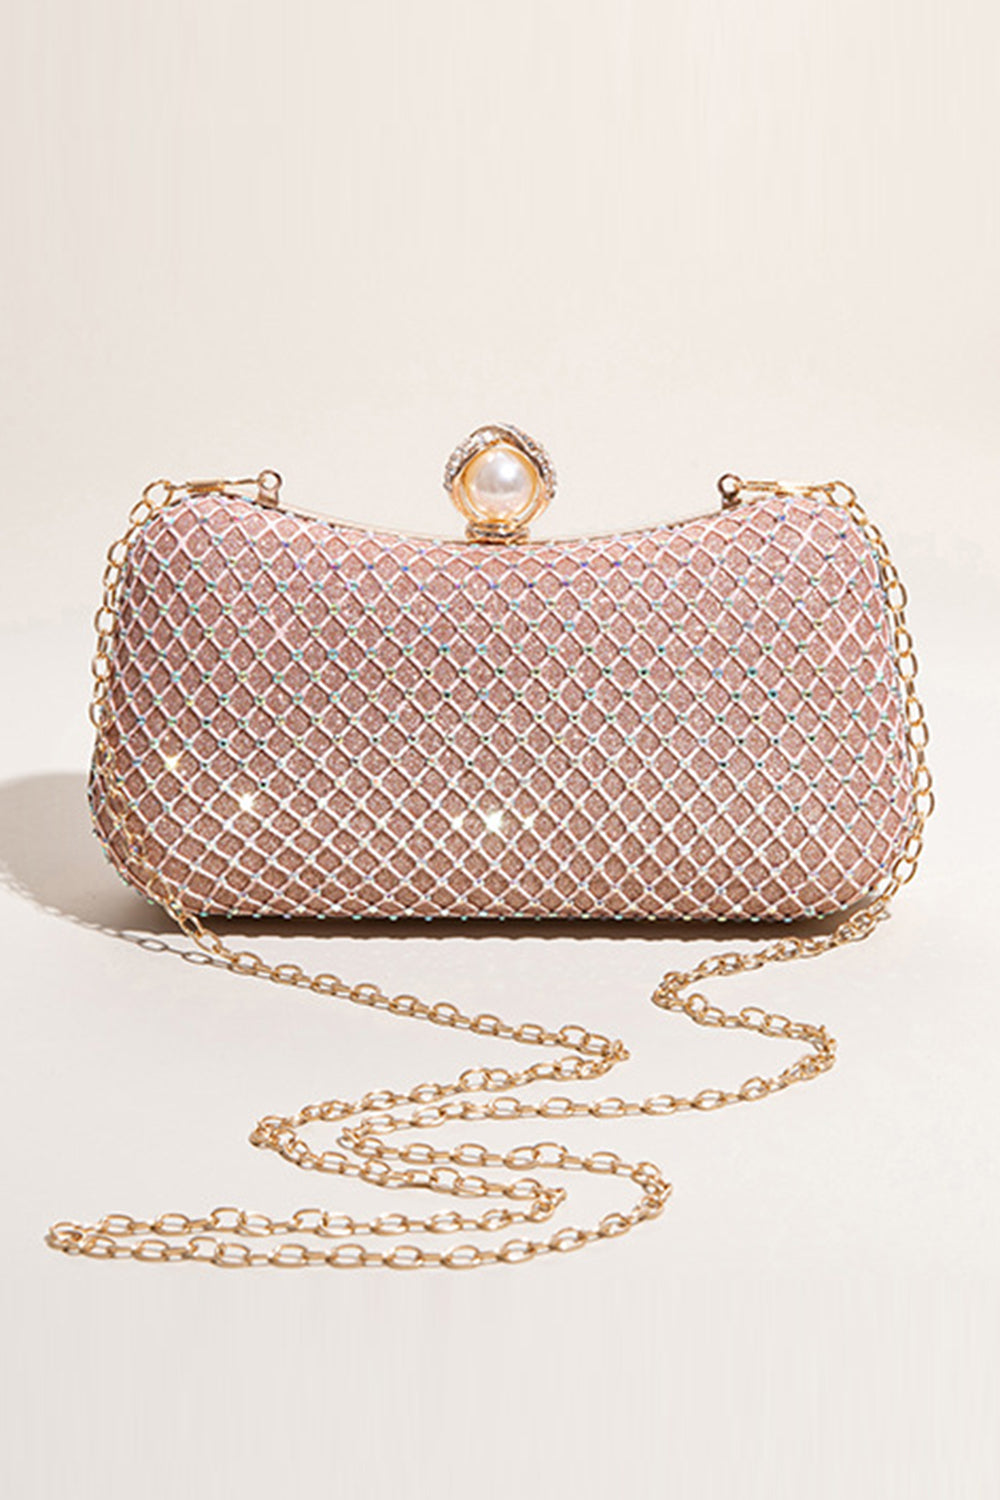 Atmosphere Mariages | Gold clutch purse, Purses, Purses crossbody